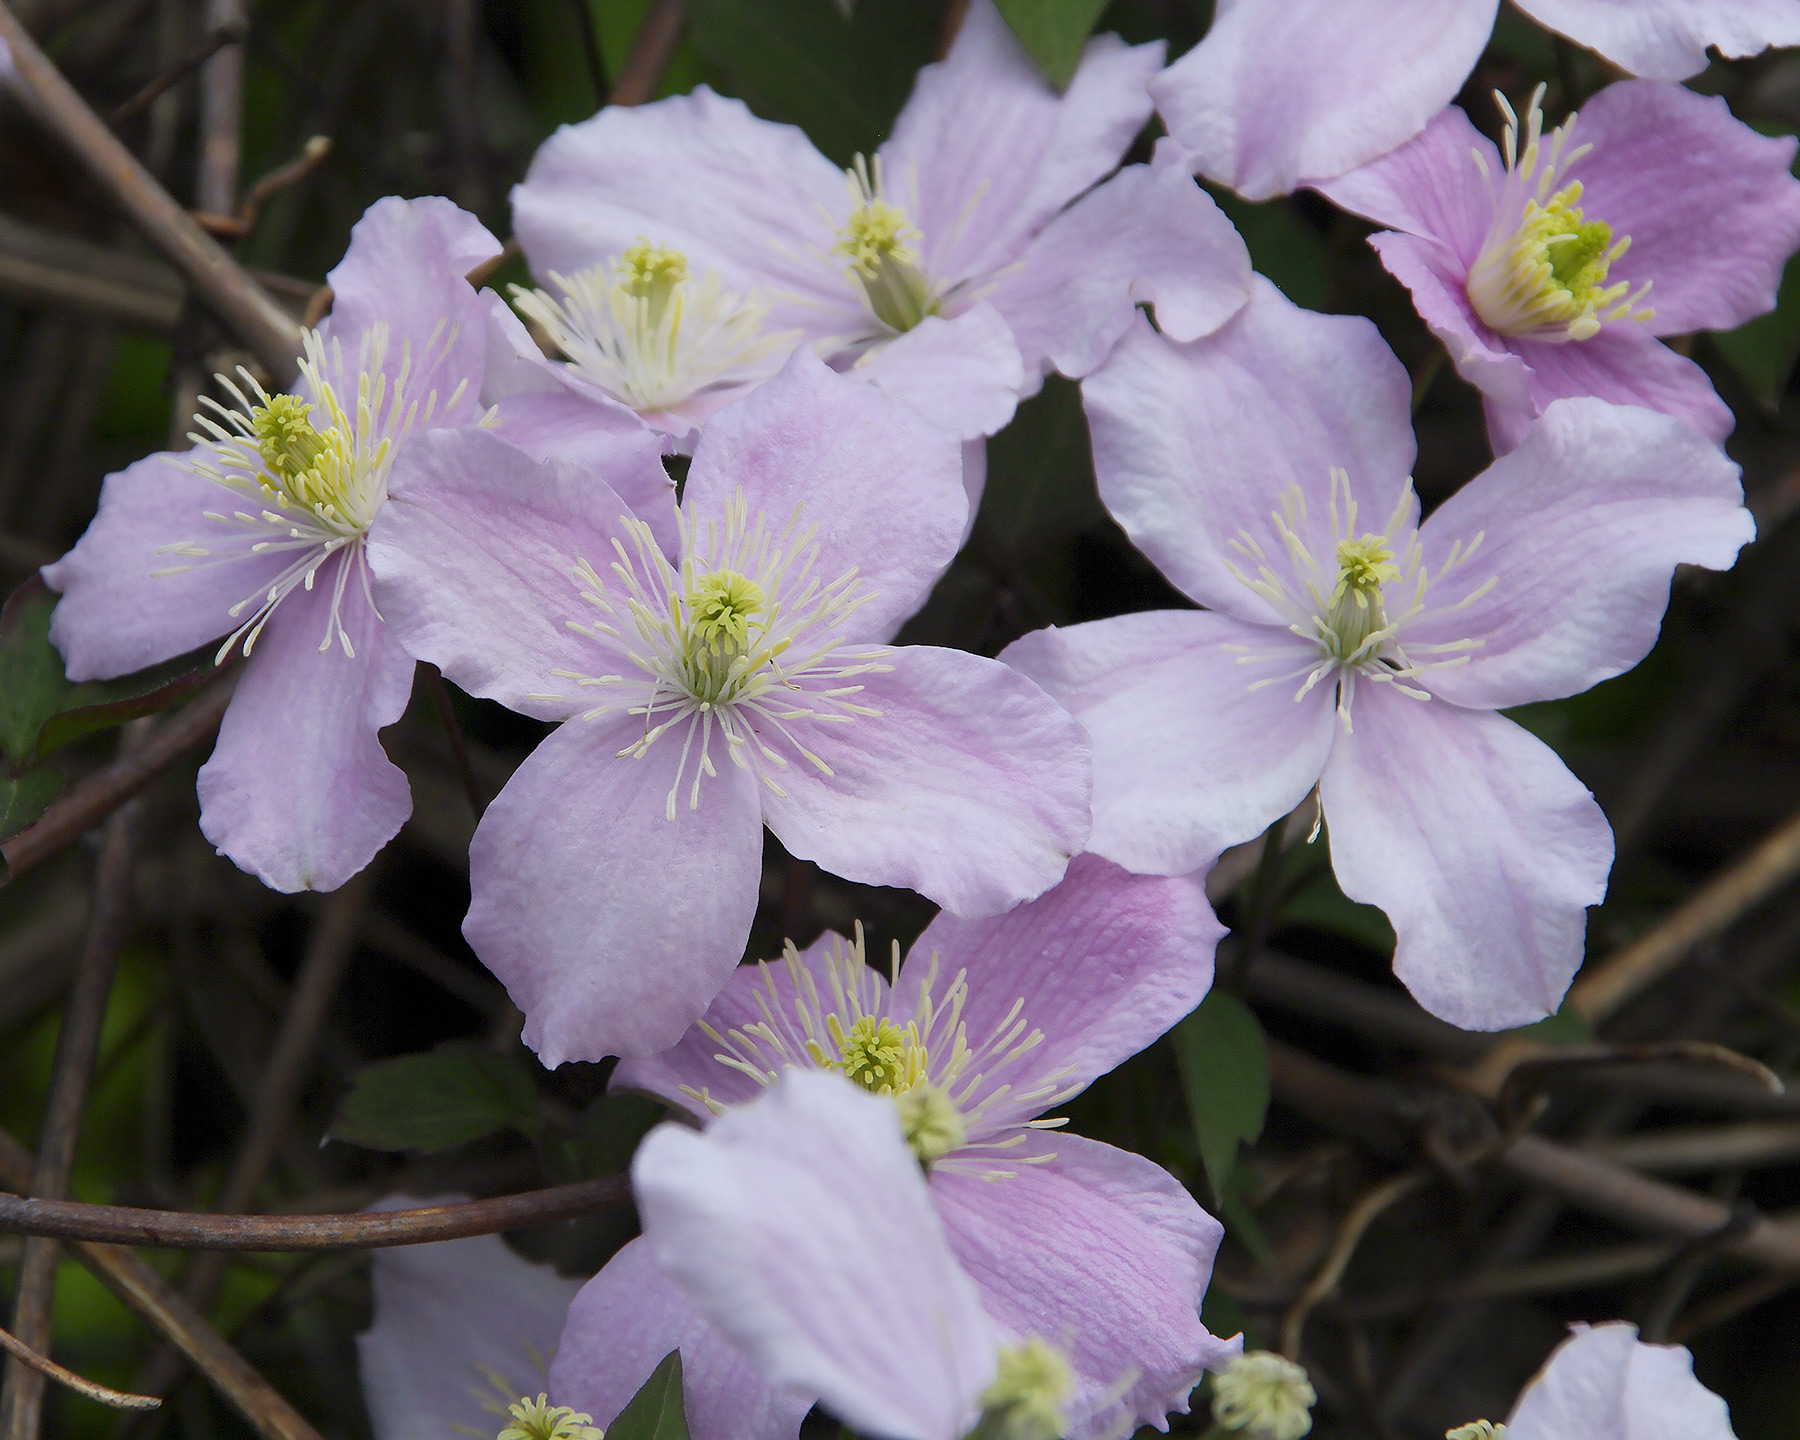 This is Clematis montana pink